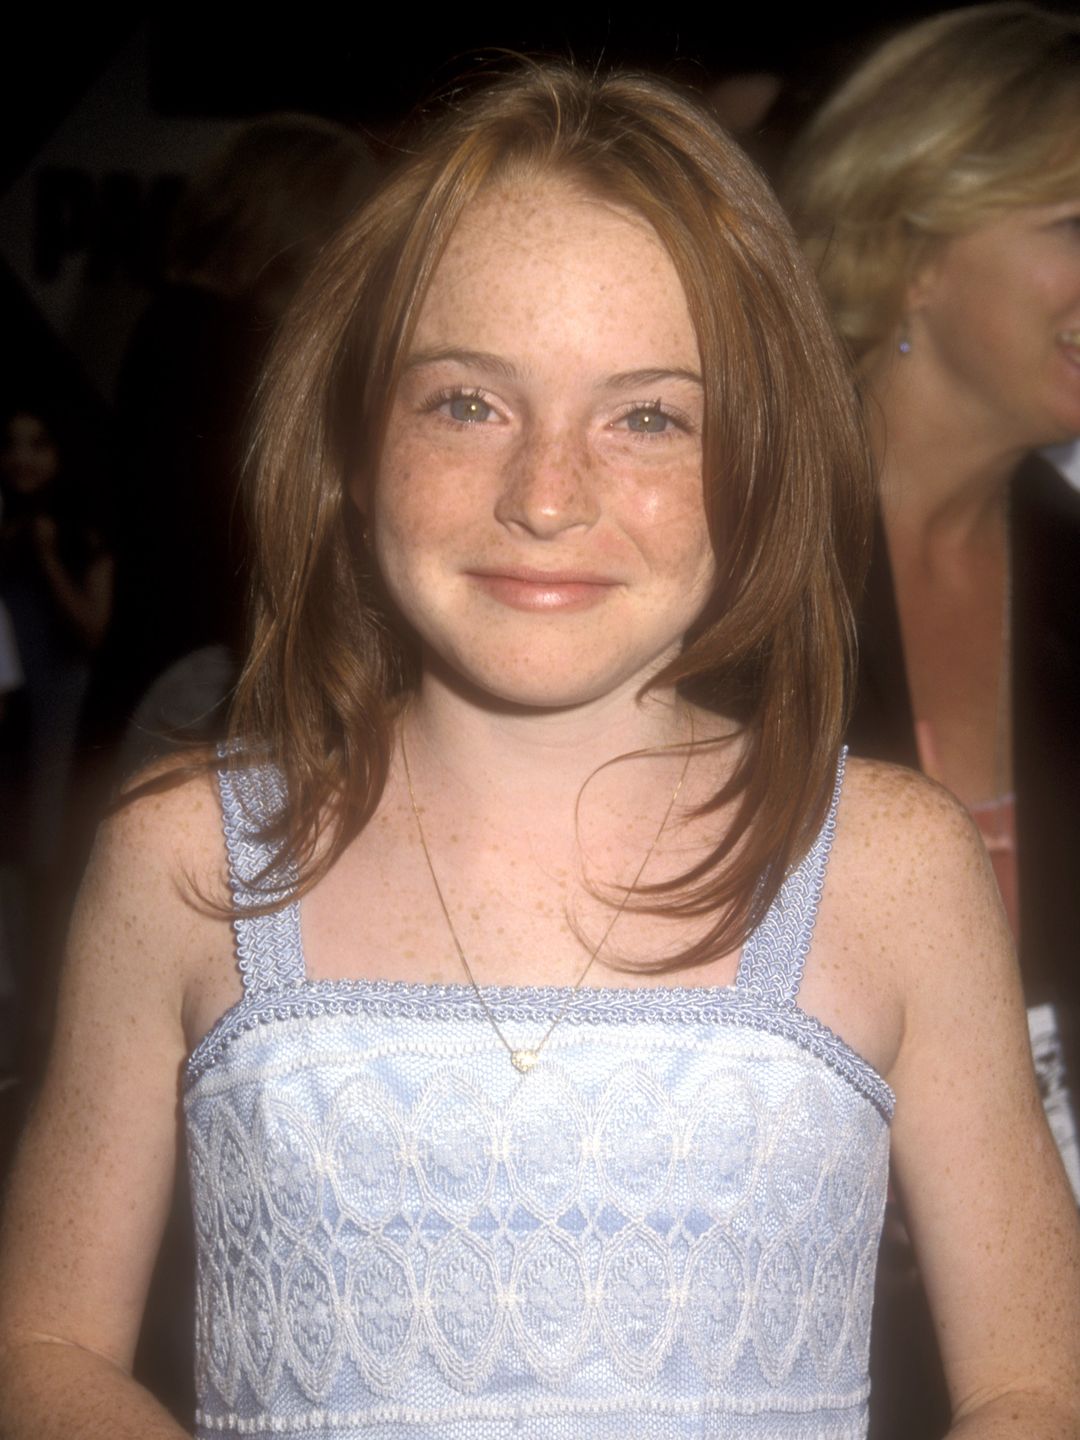 Lindsay Lohan at the premiere of Parent Trap in 1998